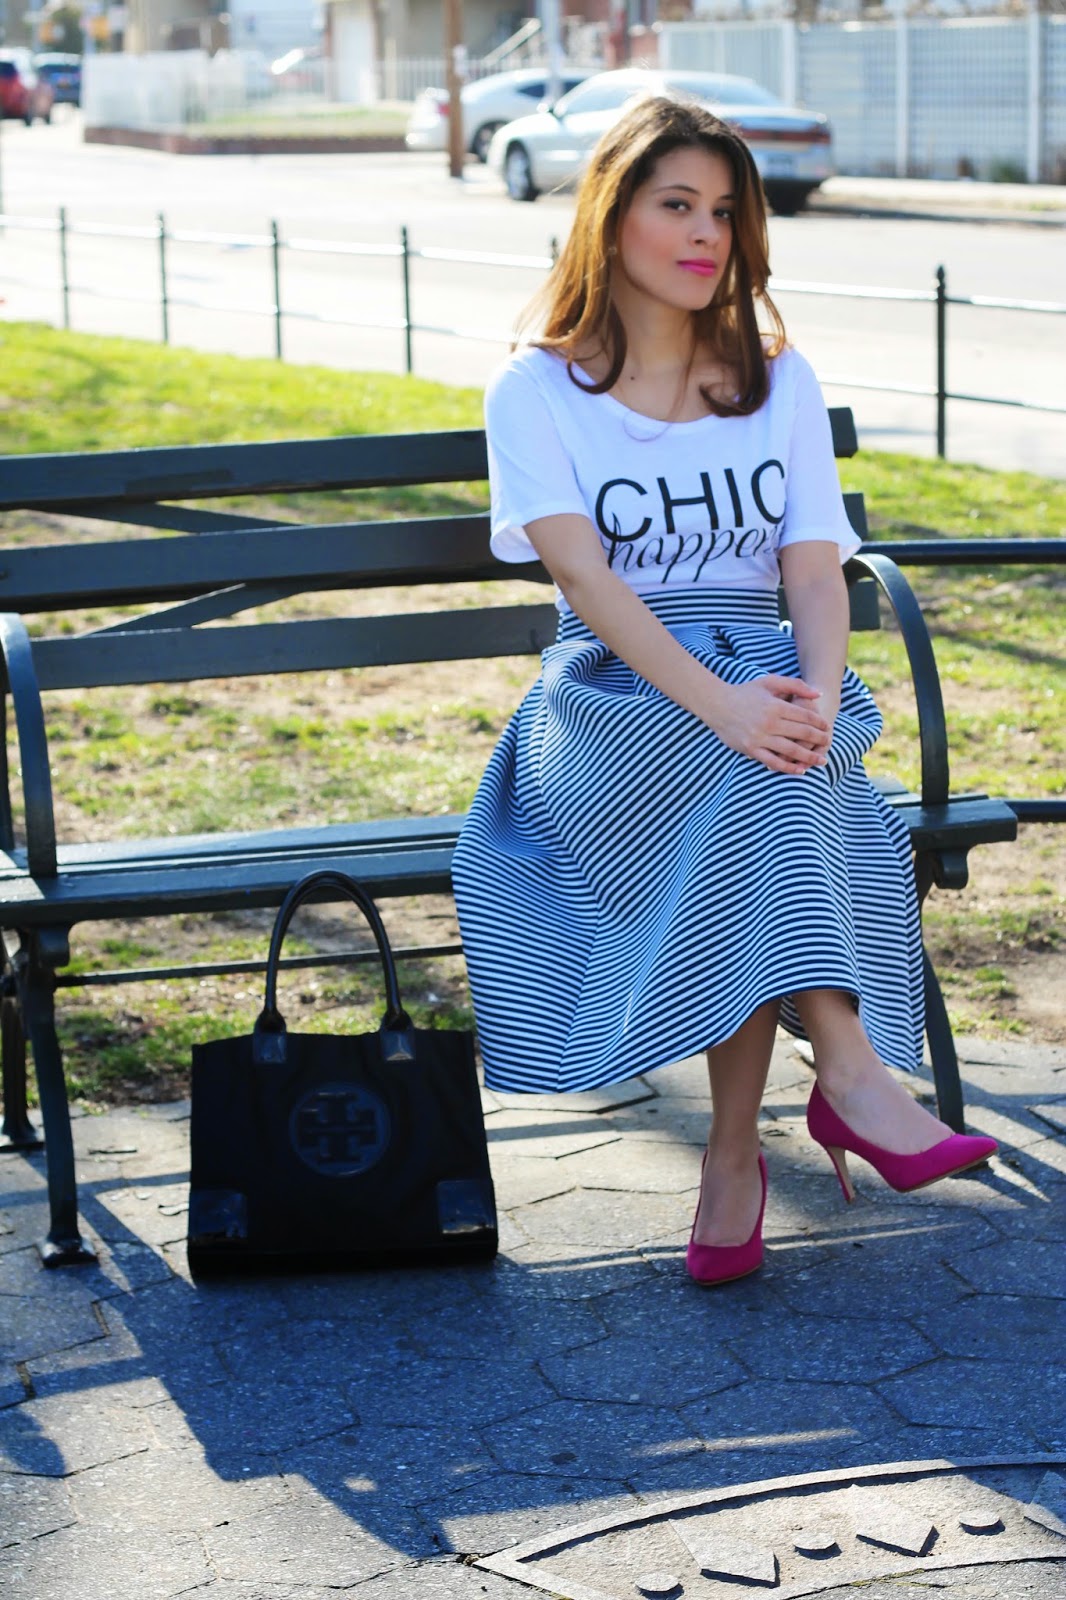 Chic Seams by Rosewood